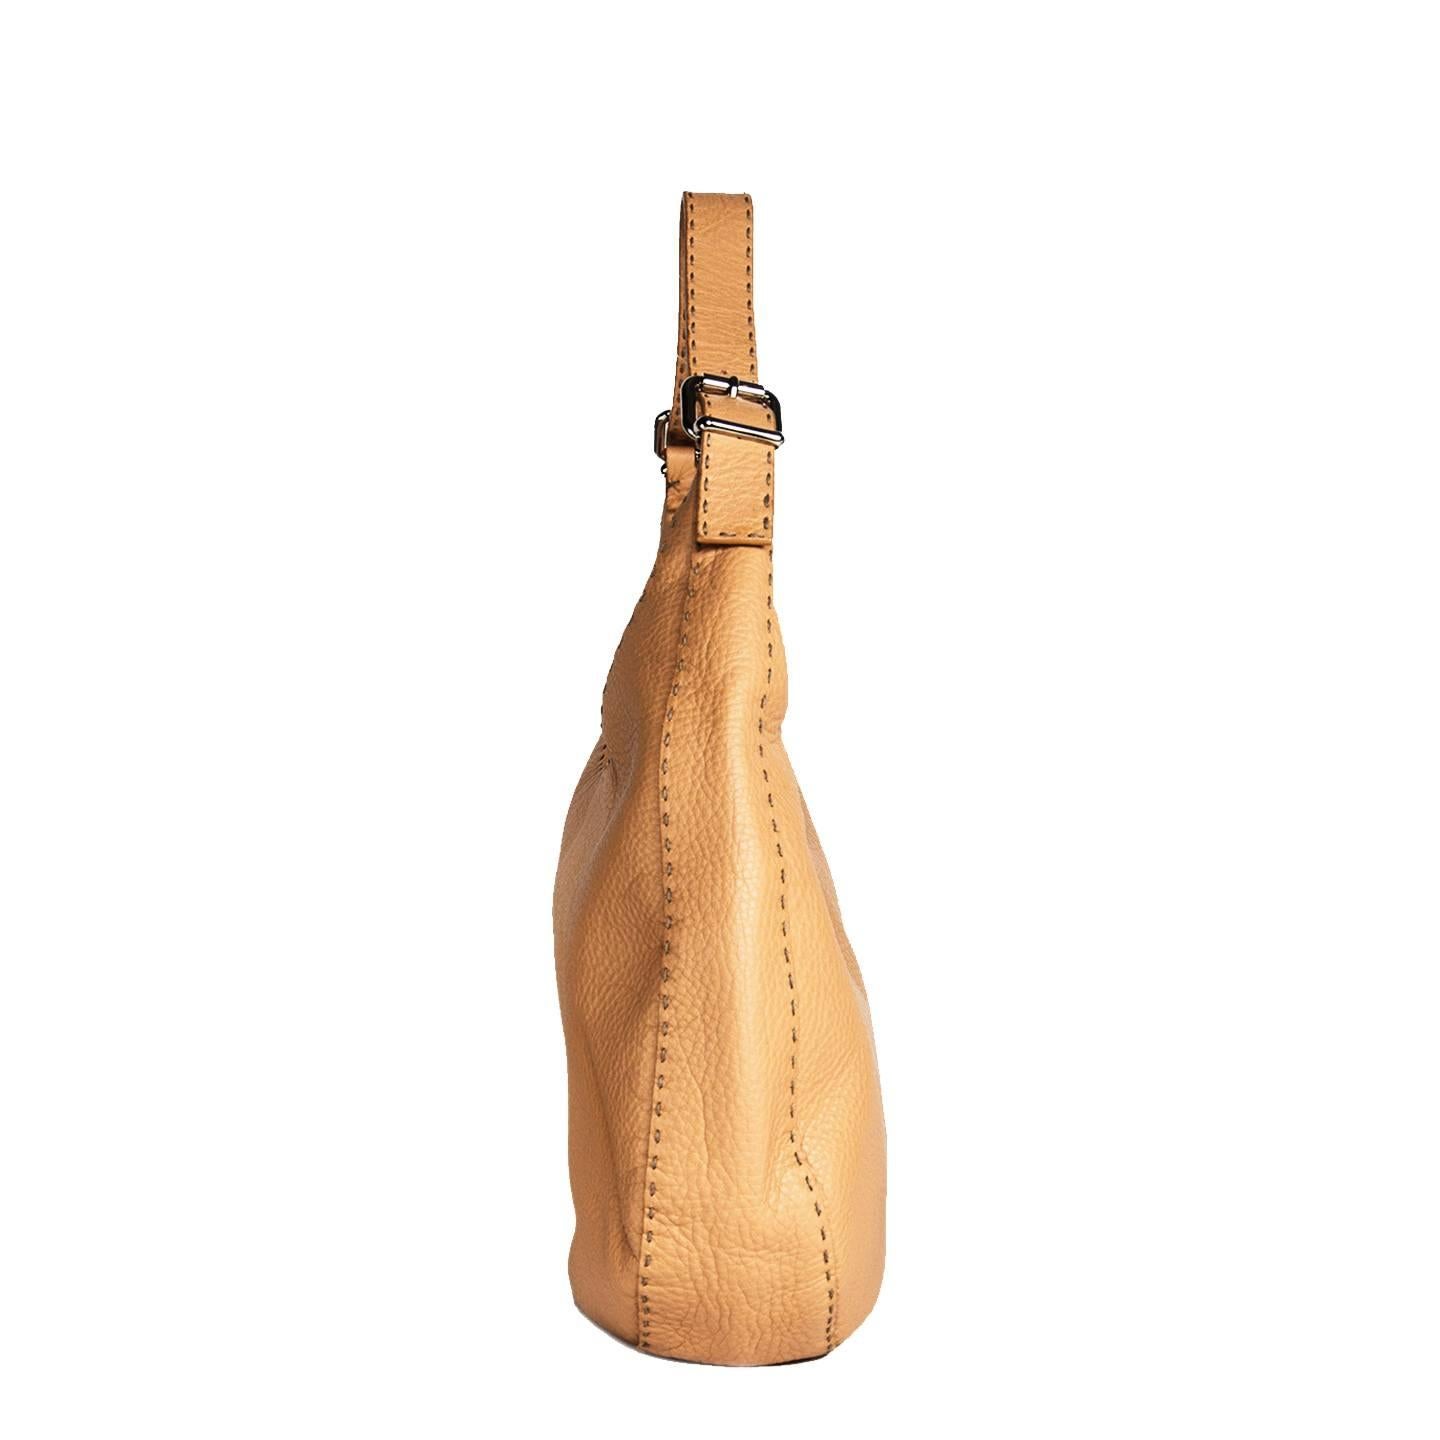 Cuoio Romano hand made hobo bag with contrasting dark color long hand top stitches on all seams and silver chunky zipper and buckles. Beautiful roman leather made with totally ecological leather containing no substances that may be harmful to man